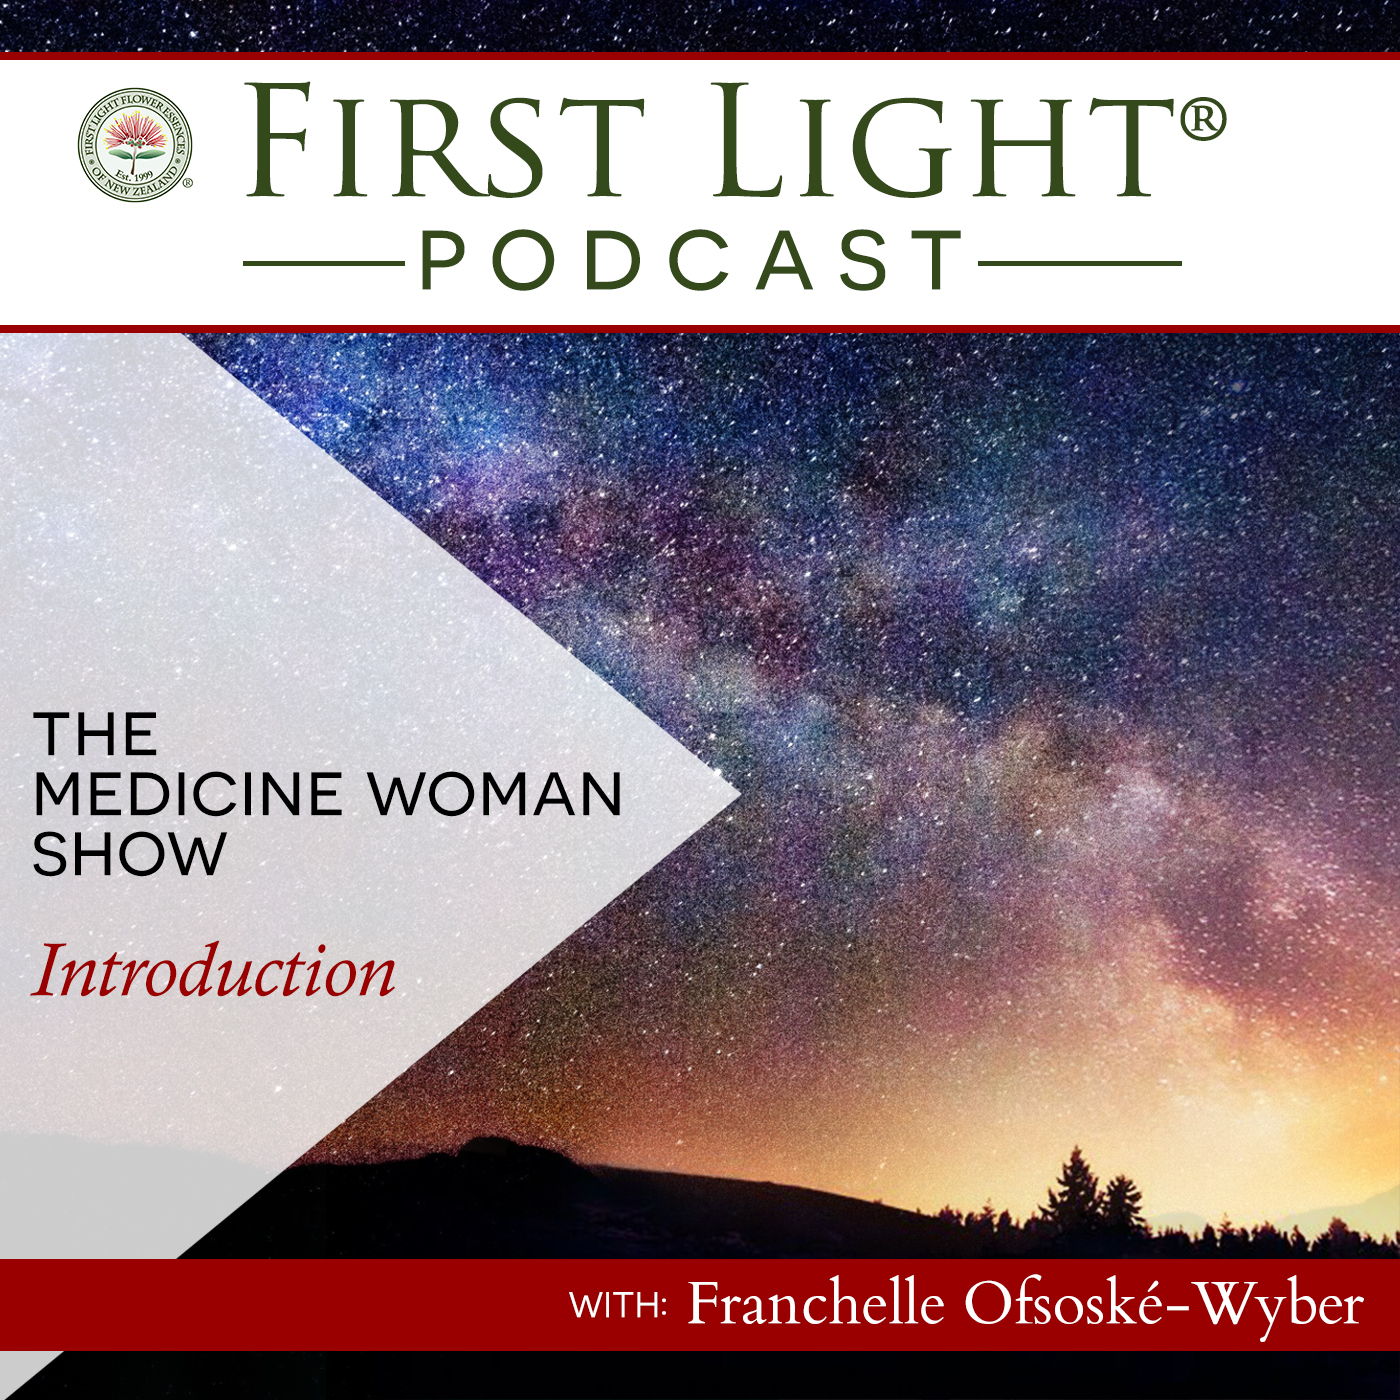 The Medicine Woman Show - Introduction